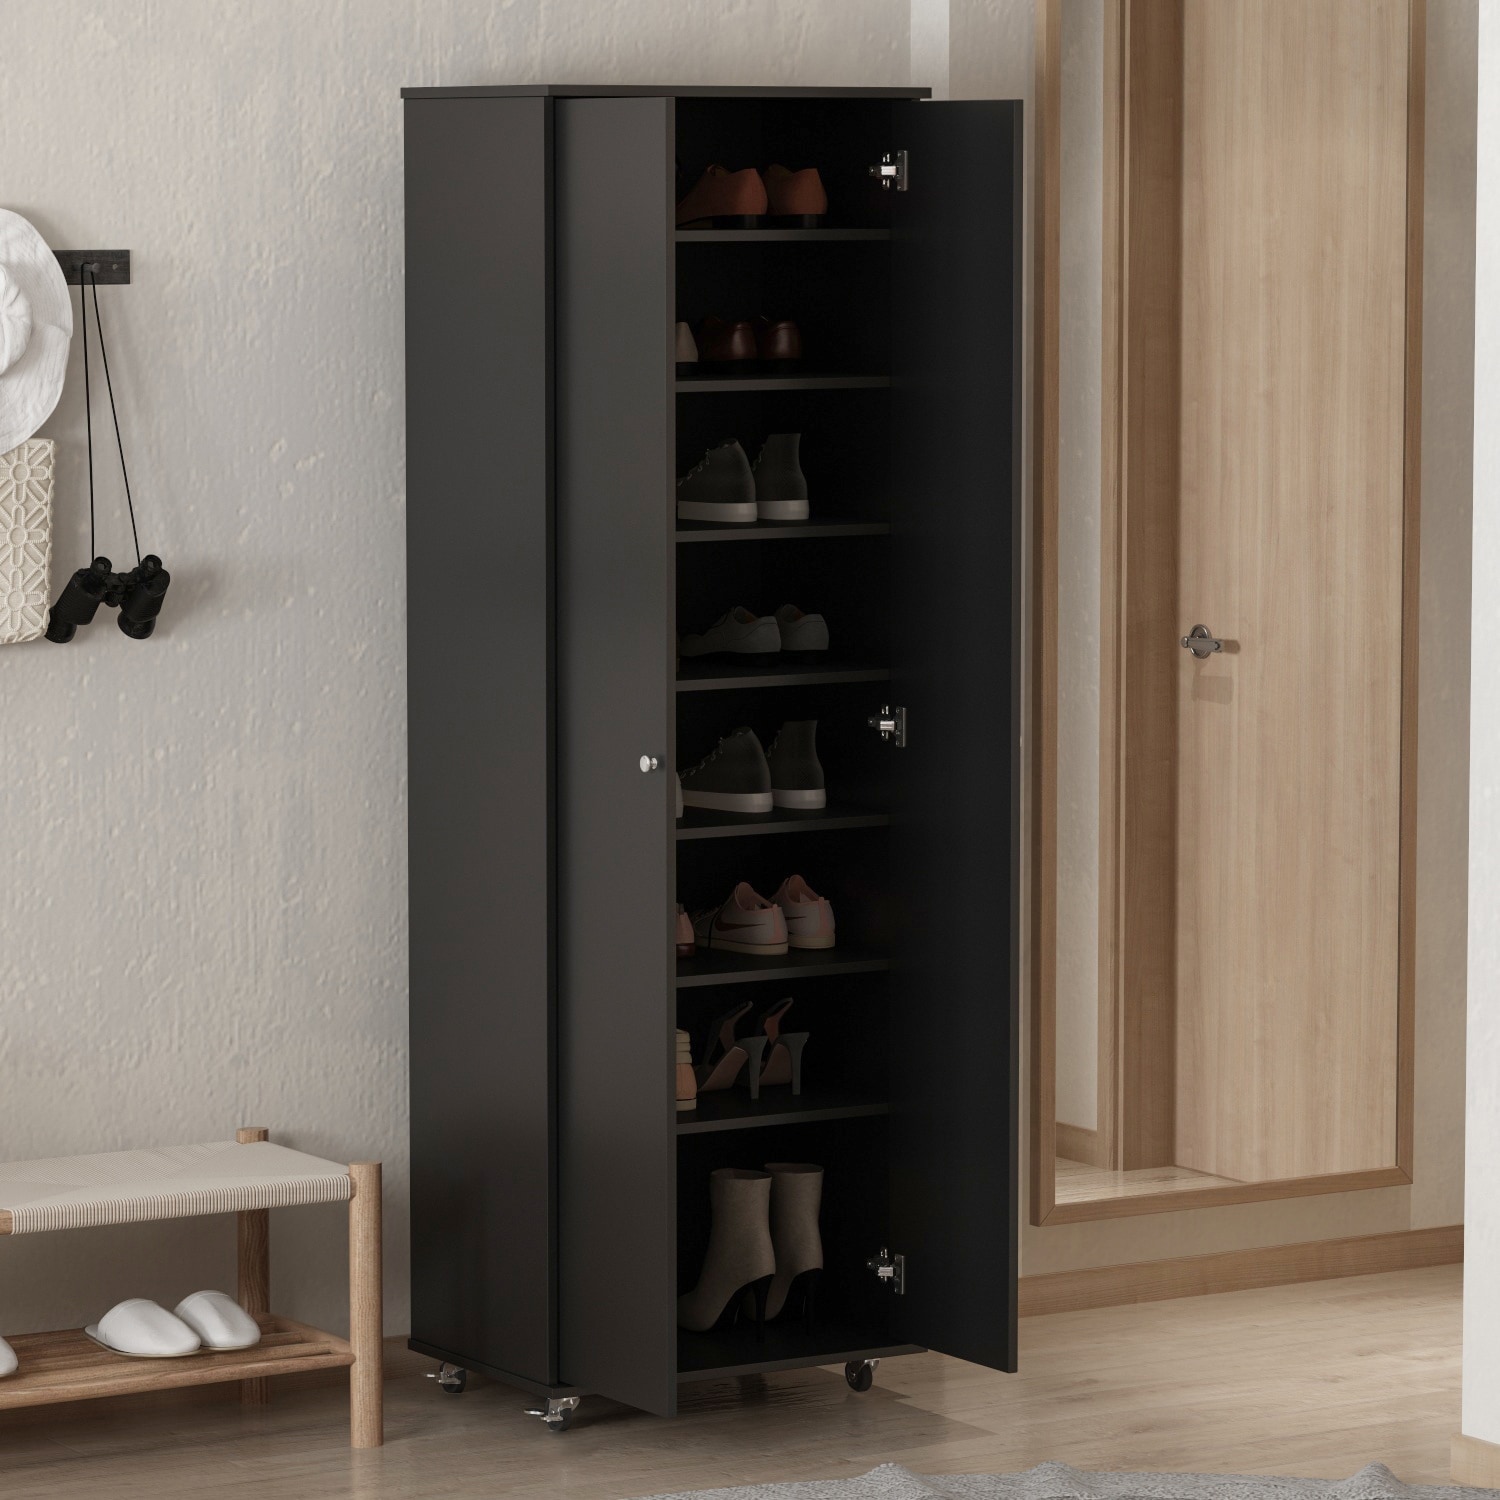 https://ak1.ostkcdn.com/images/products/is/images/direct/53e2c0985252c41f1343d7f9df474513ab355c7c/Kerrogee-Tall-Shoe-Cabinet-with-Doors%2C-8-Tier-Shoe-Storage-with-Wheel.jpg